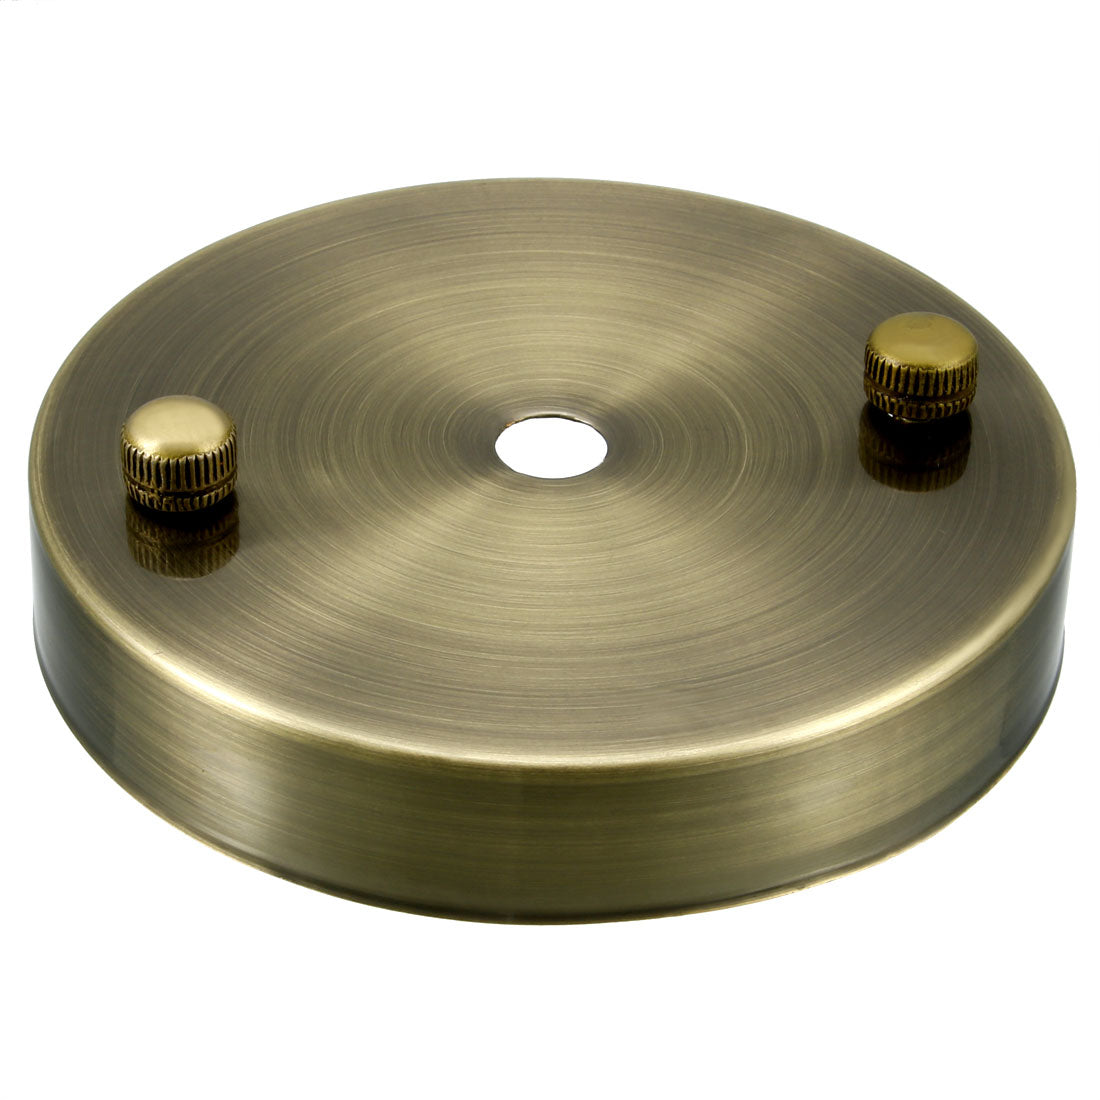 uxcell Uxcell Retro Ceiling Light Plate Pointed Base Chassis Disc Pendant Accessories 100mmx17mm Bronze Tone w Screw